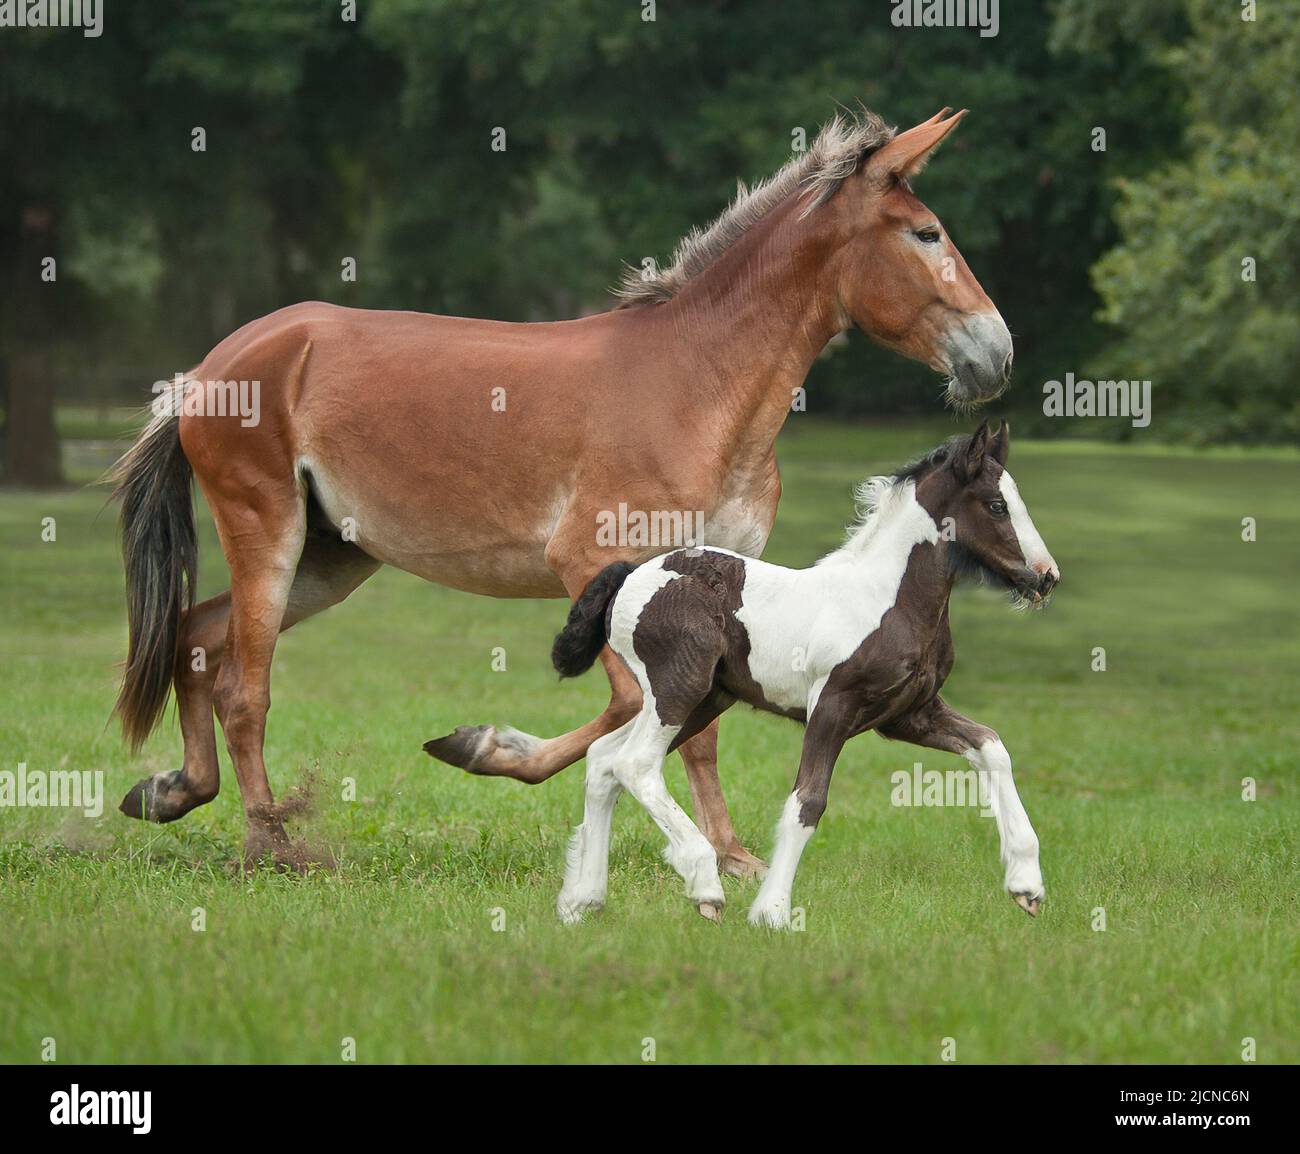 Mule 'Mom' with embryo transfer Gypsy Vanner Horse foal Stock Photo